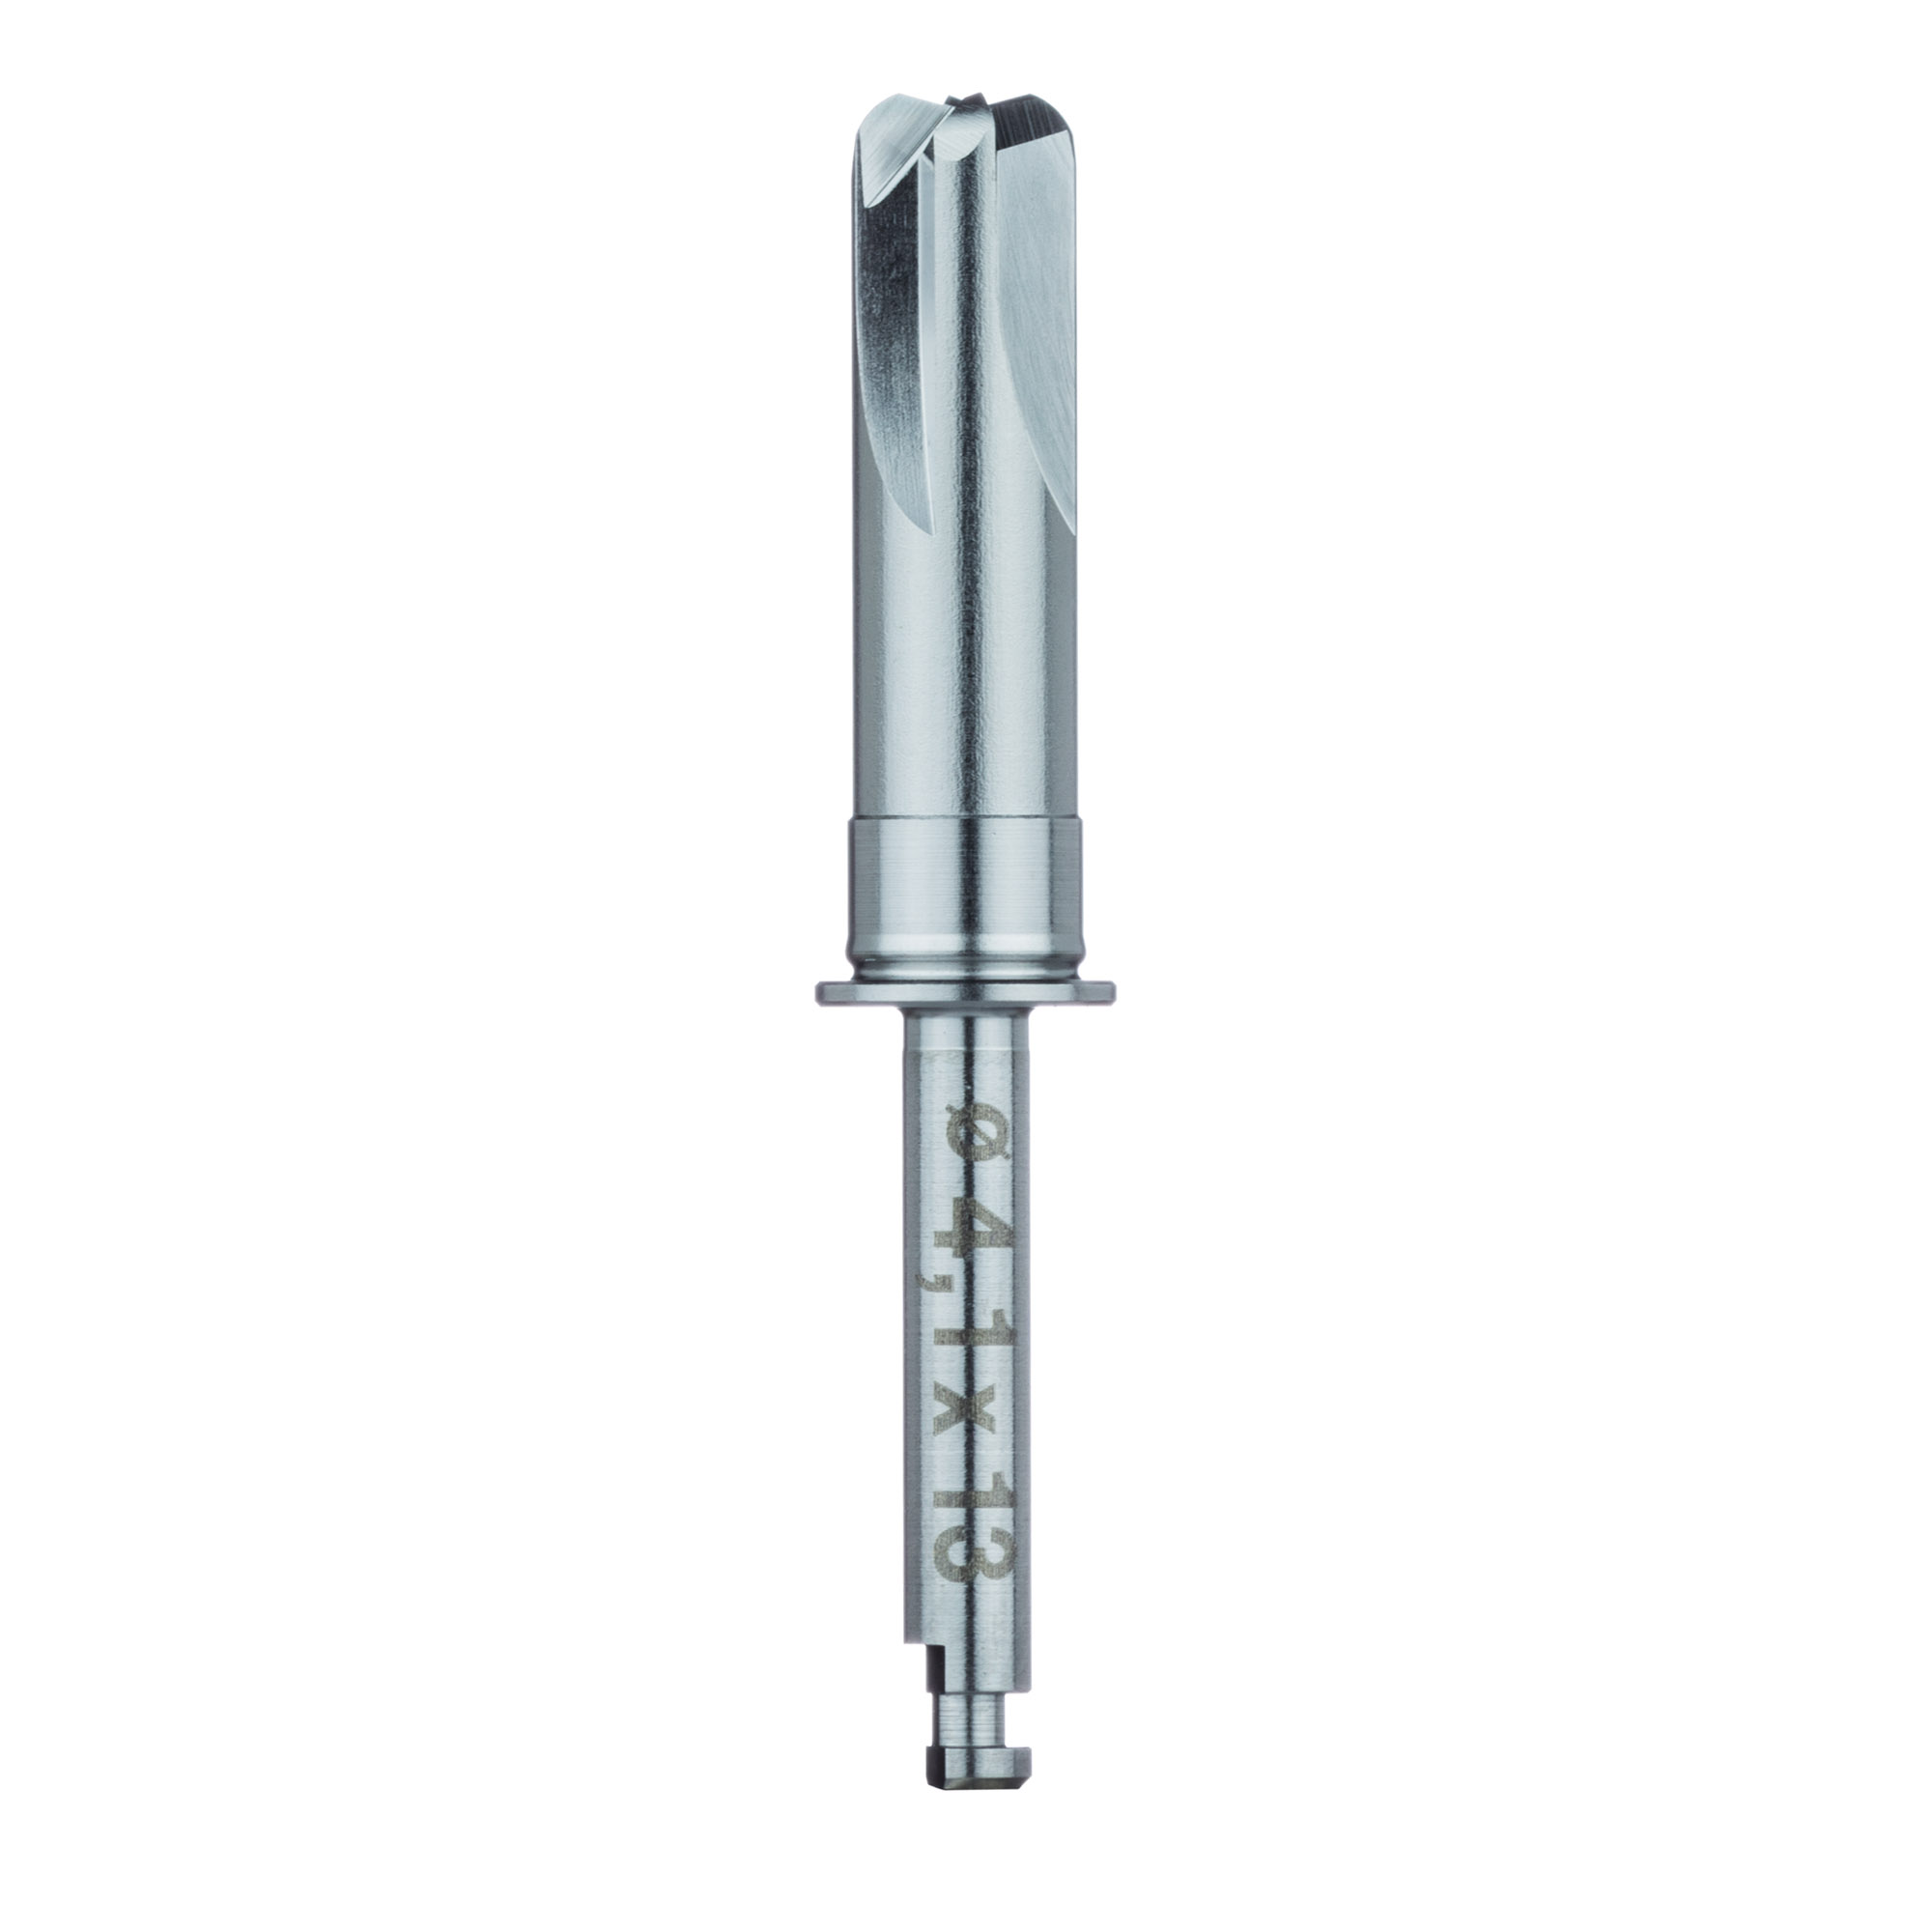 CL007 Surgery, Crestal Drill with Stop, 4.1mm Ø, RAXL